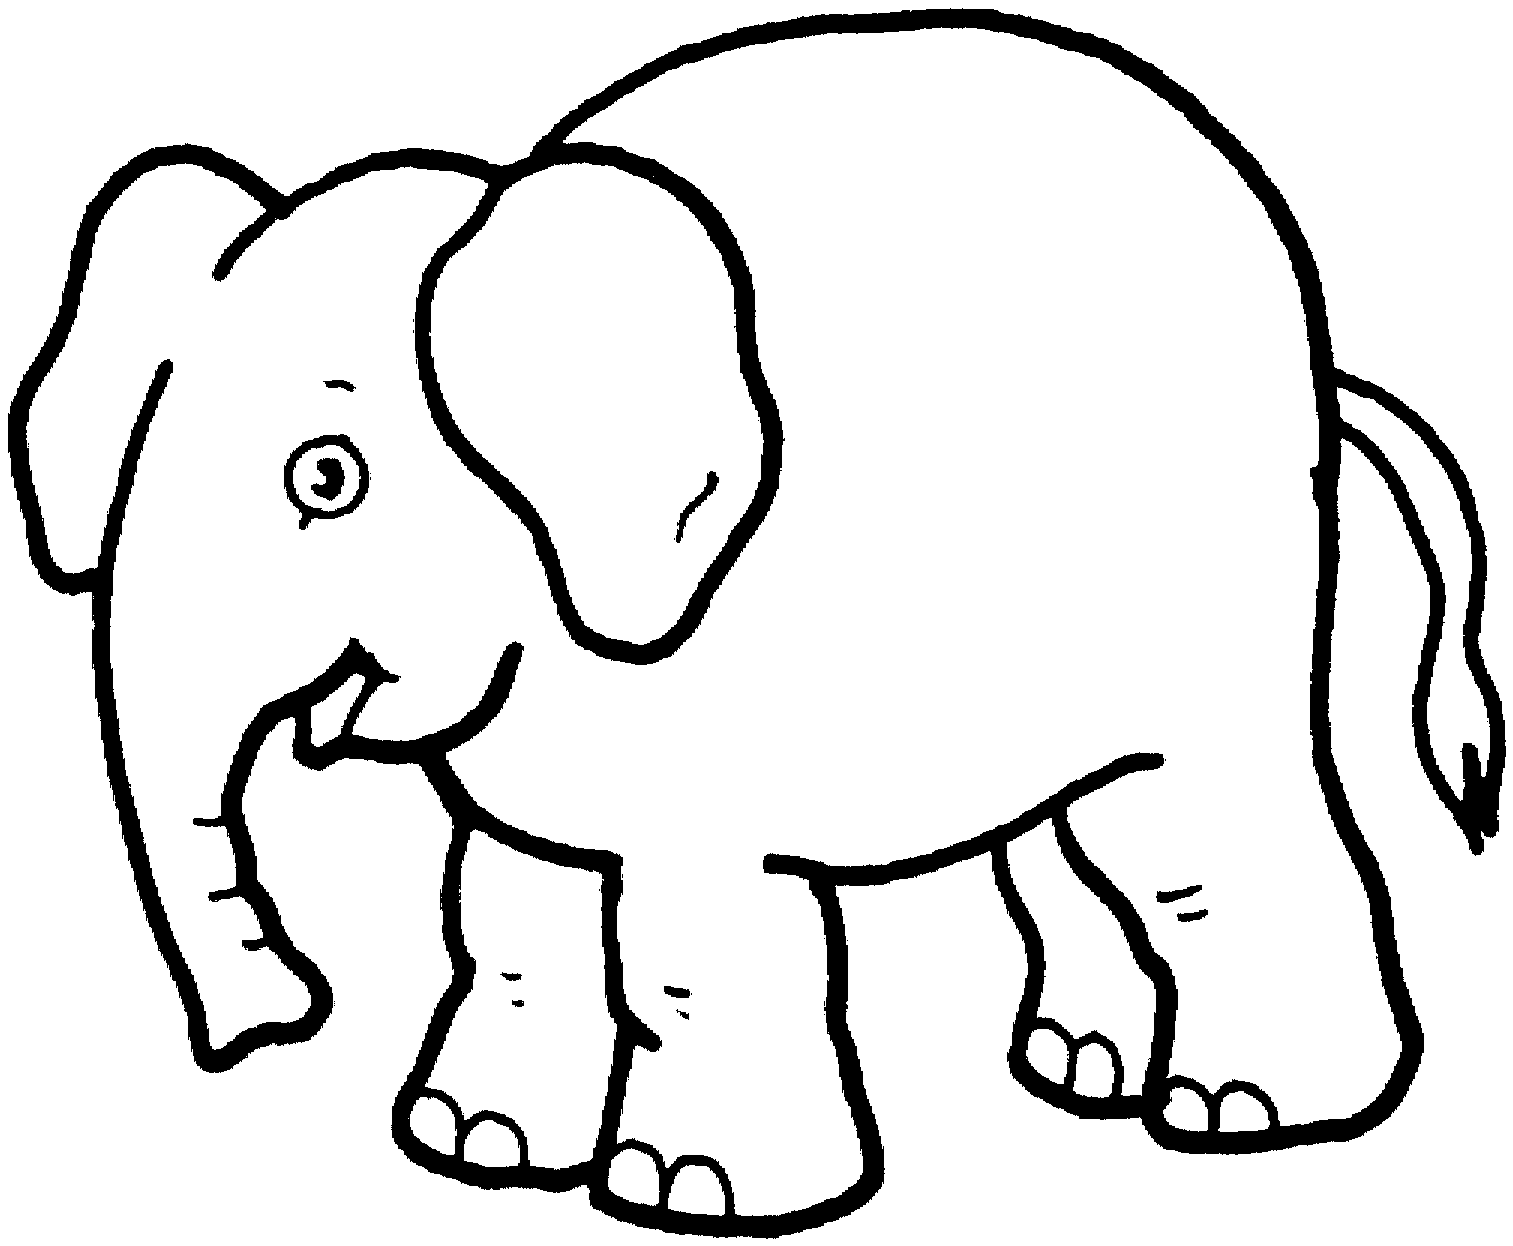 Image of Elephant Clipart Black and White